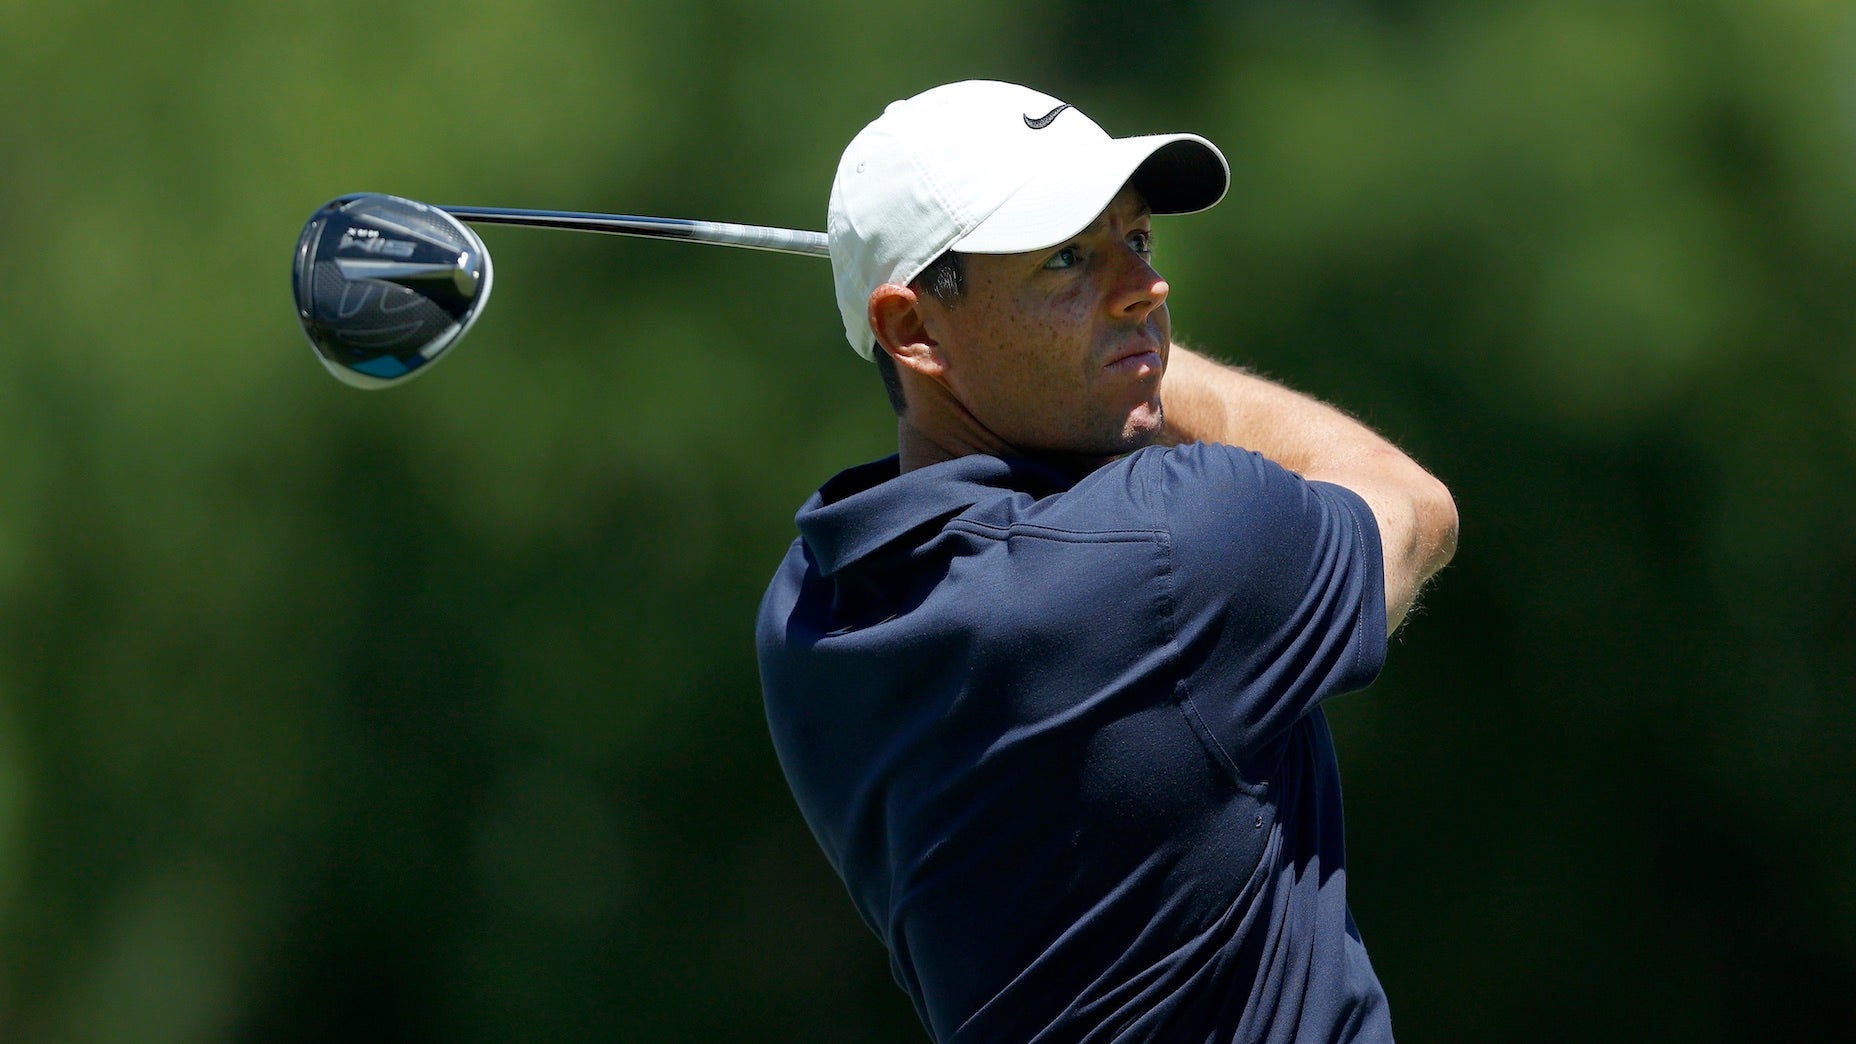 5 equipment storylines: Why Rory changed drivers, Sergio's gear